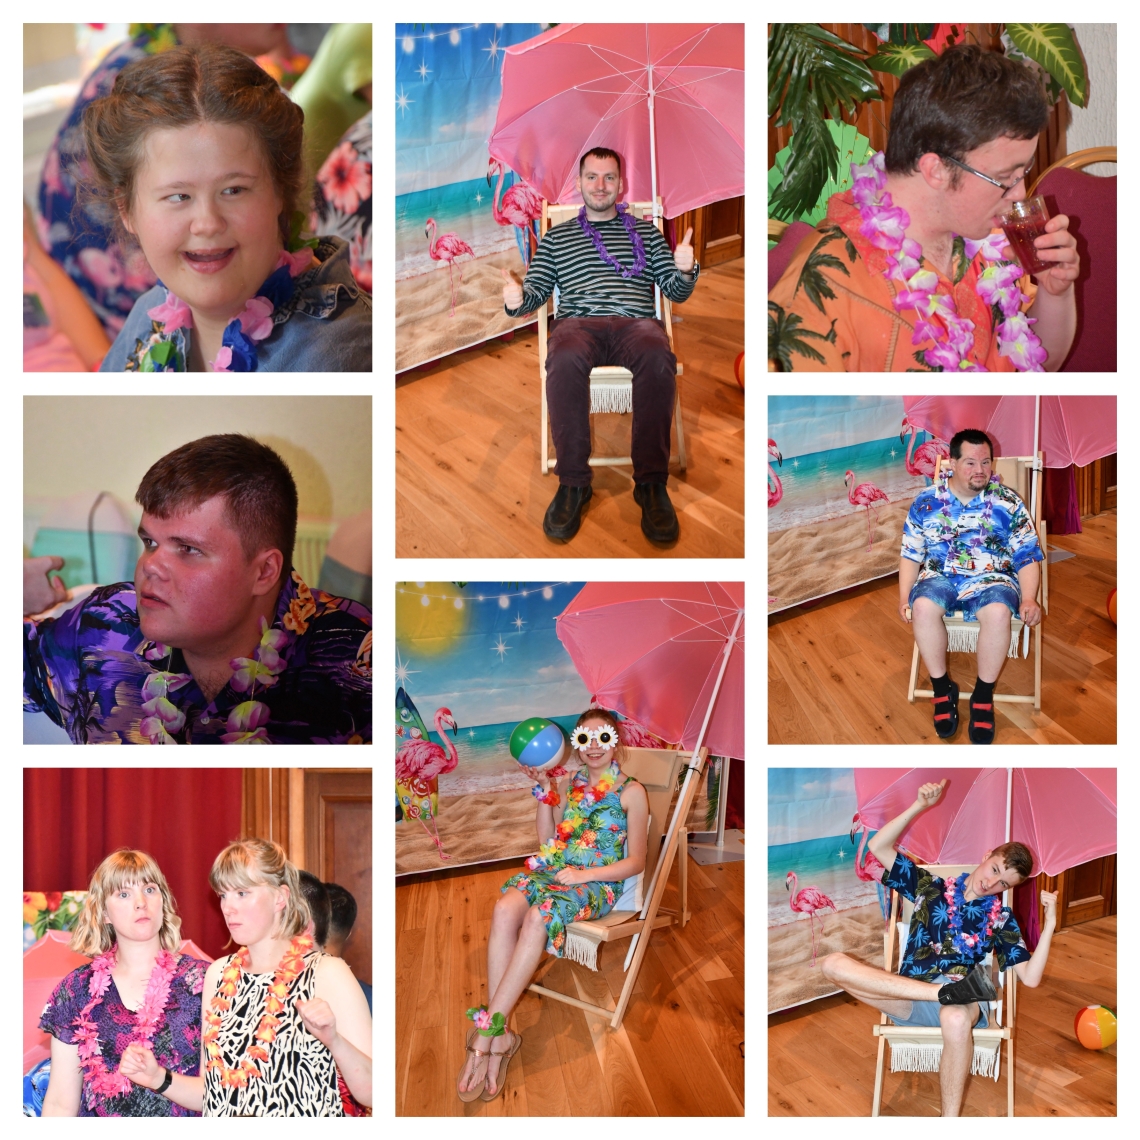 Summer ball collage with learners enjoying the party